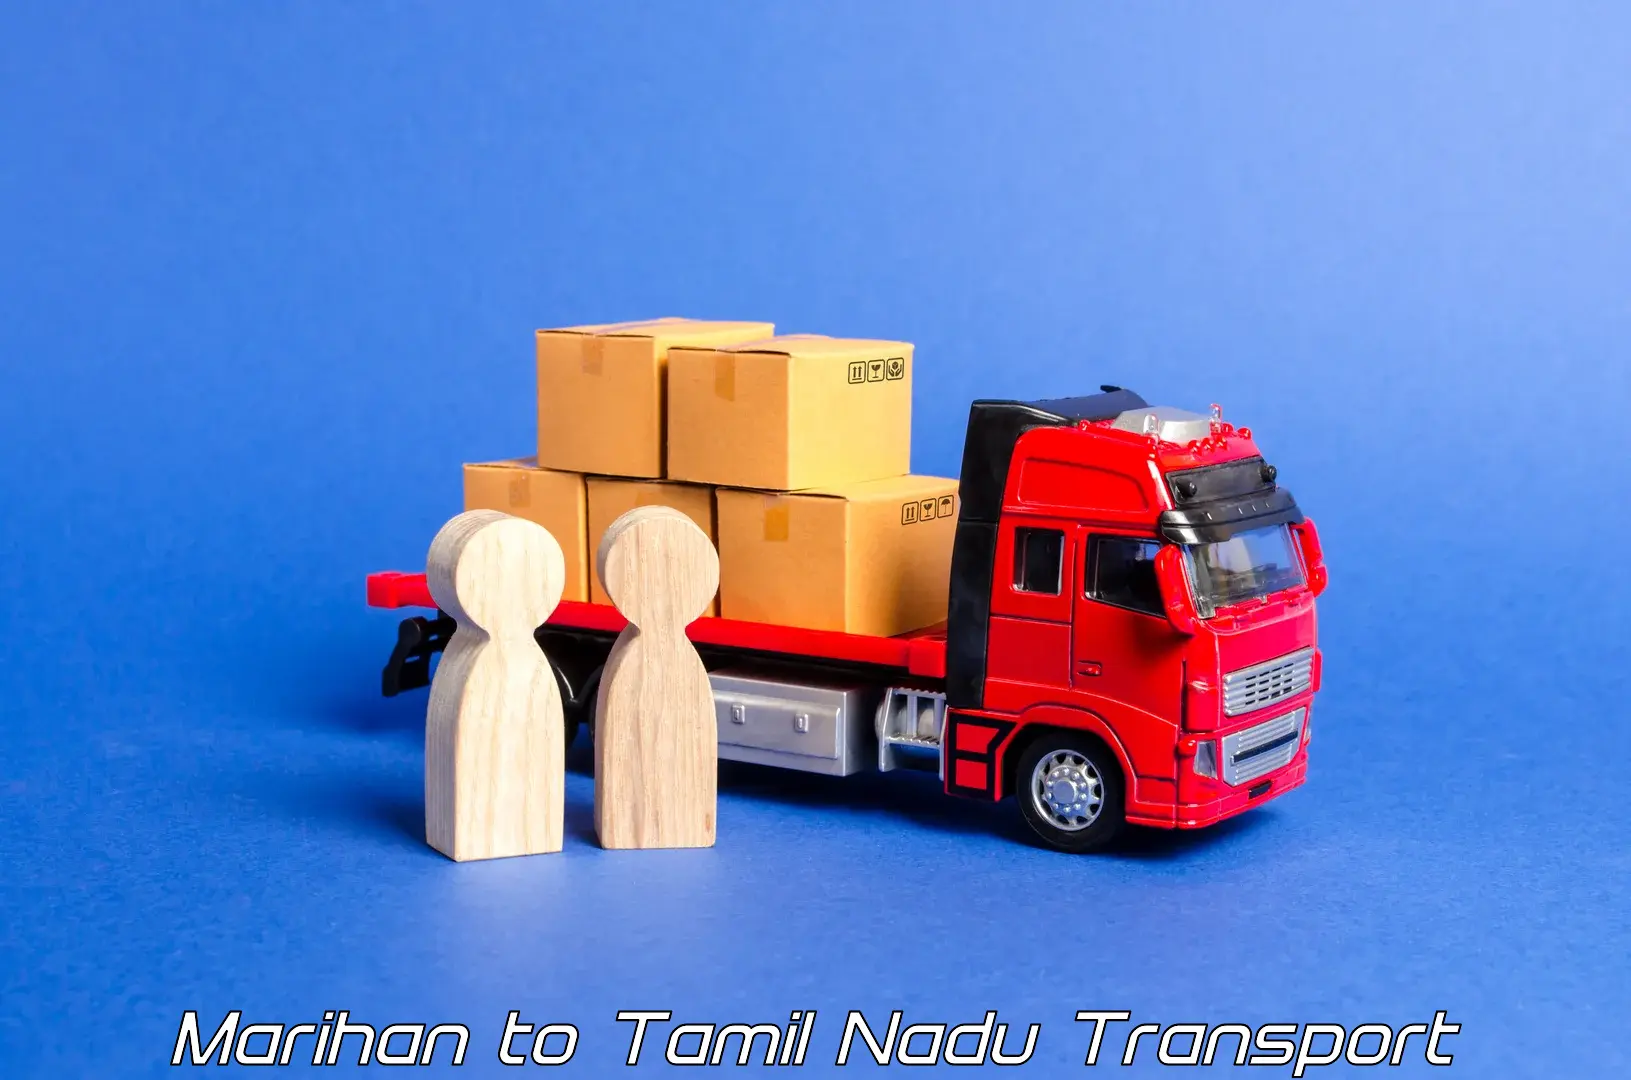 Delivery service Marihan to Chennai Port